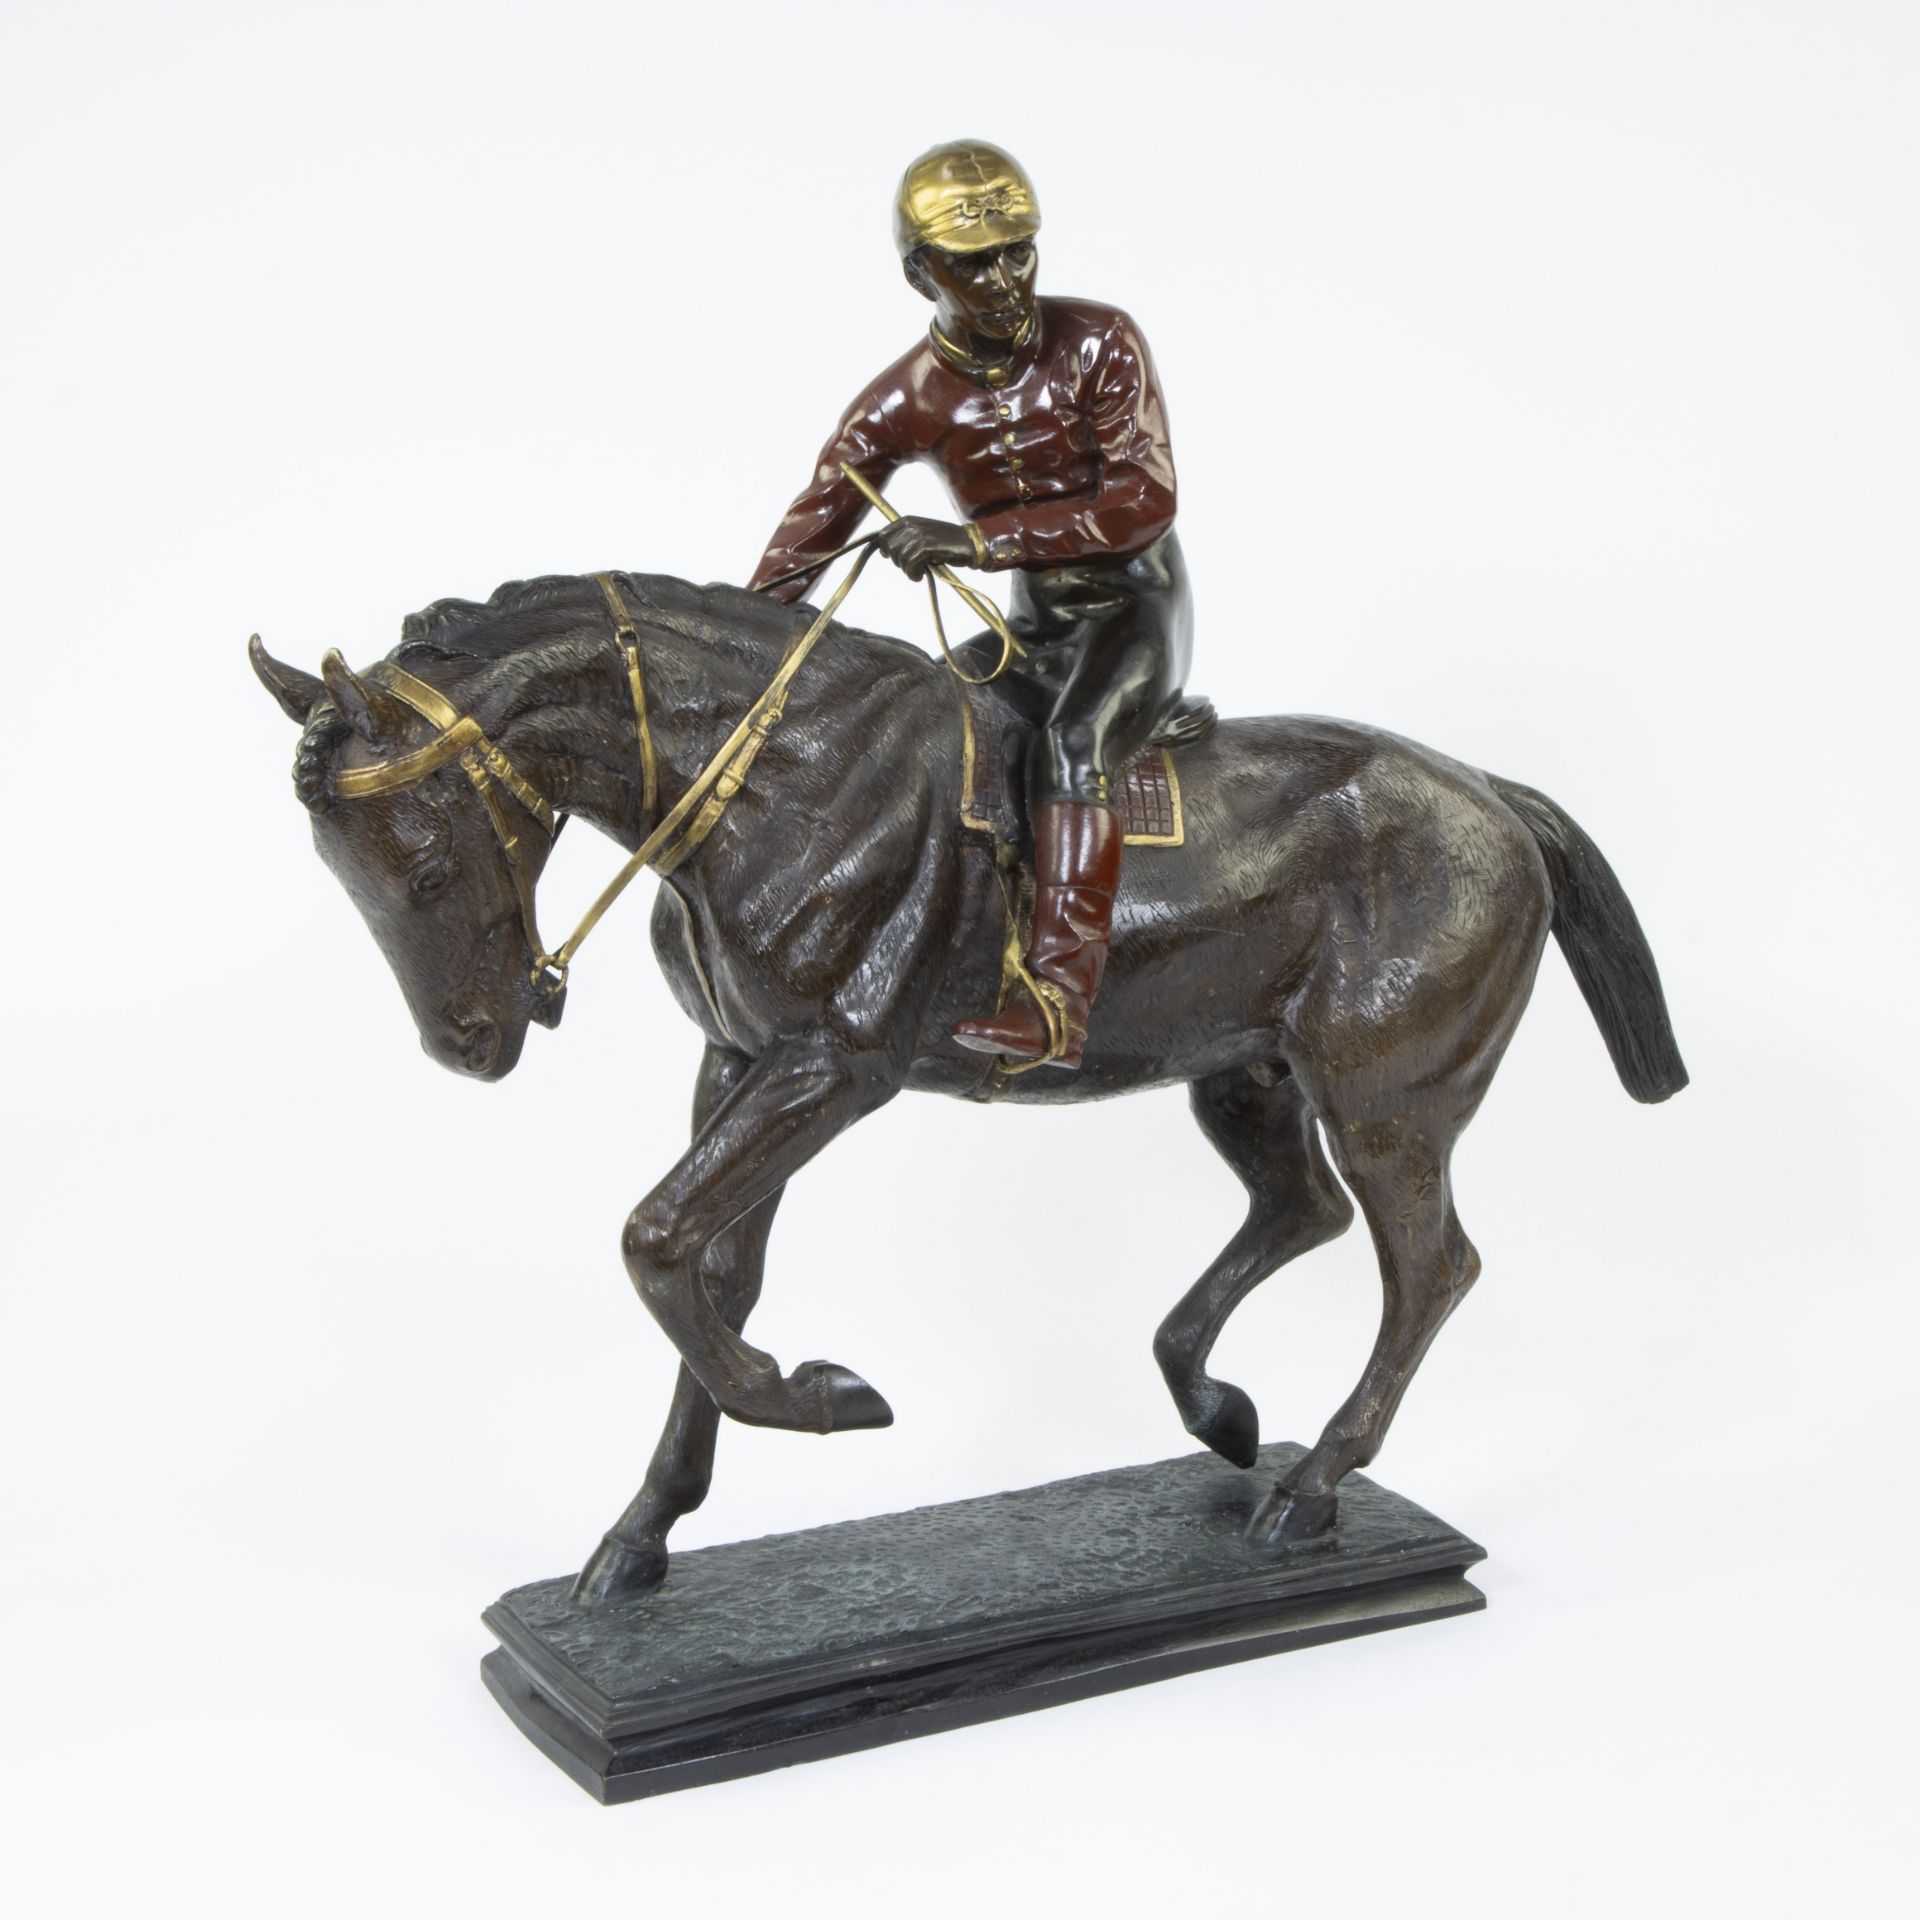 Polychromed bronze horse with Jockey, after Isidore Jules BONHEUR